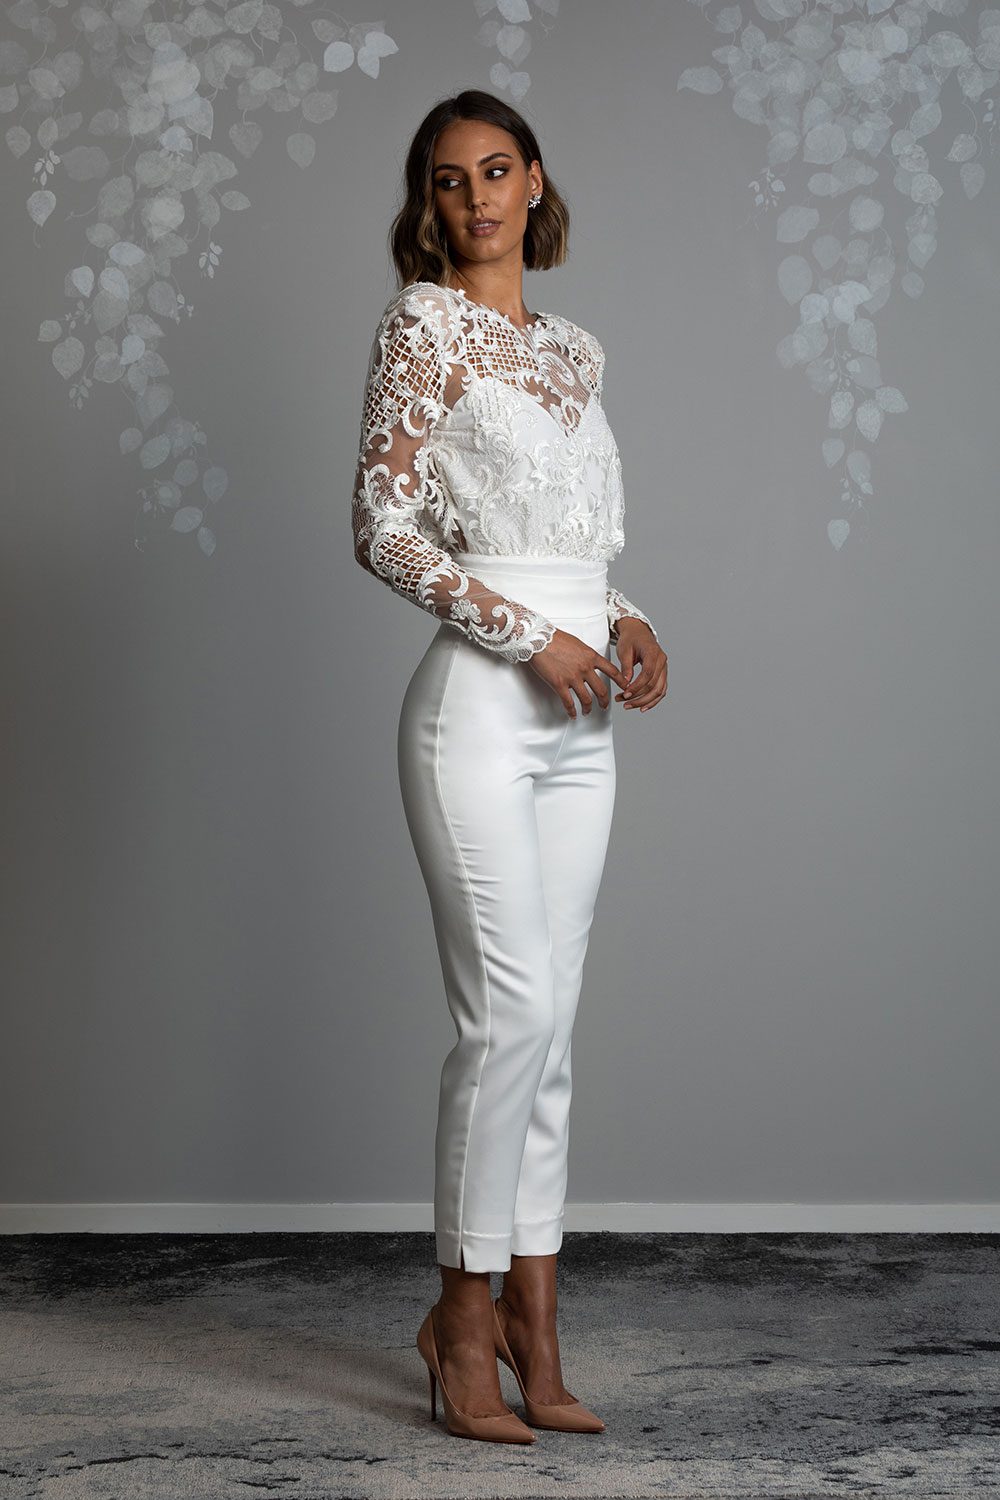 Ava Wedding Trousers and Blouse from Vinka Design - Elegantly tailored trouser combined with a beautiful lace blouse for the Modern Bride. The blouse features a high neck and low back, with in-built camisole, fitted sleeves, & pearl buttons. Model showing of semi profile view of form fitting pants with sheer embroidered lace blouse with long sleeves